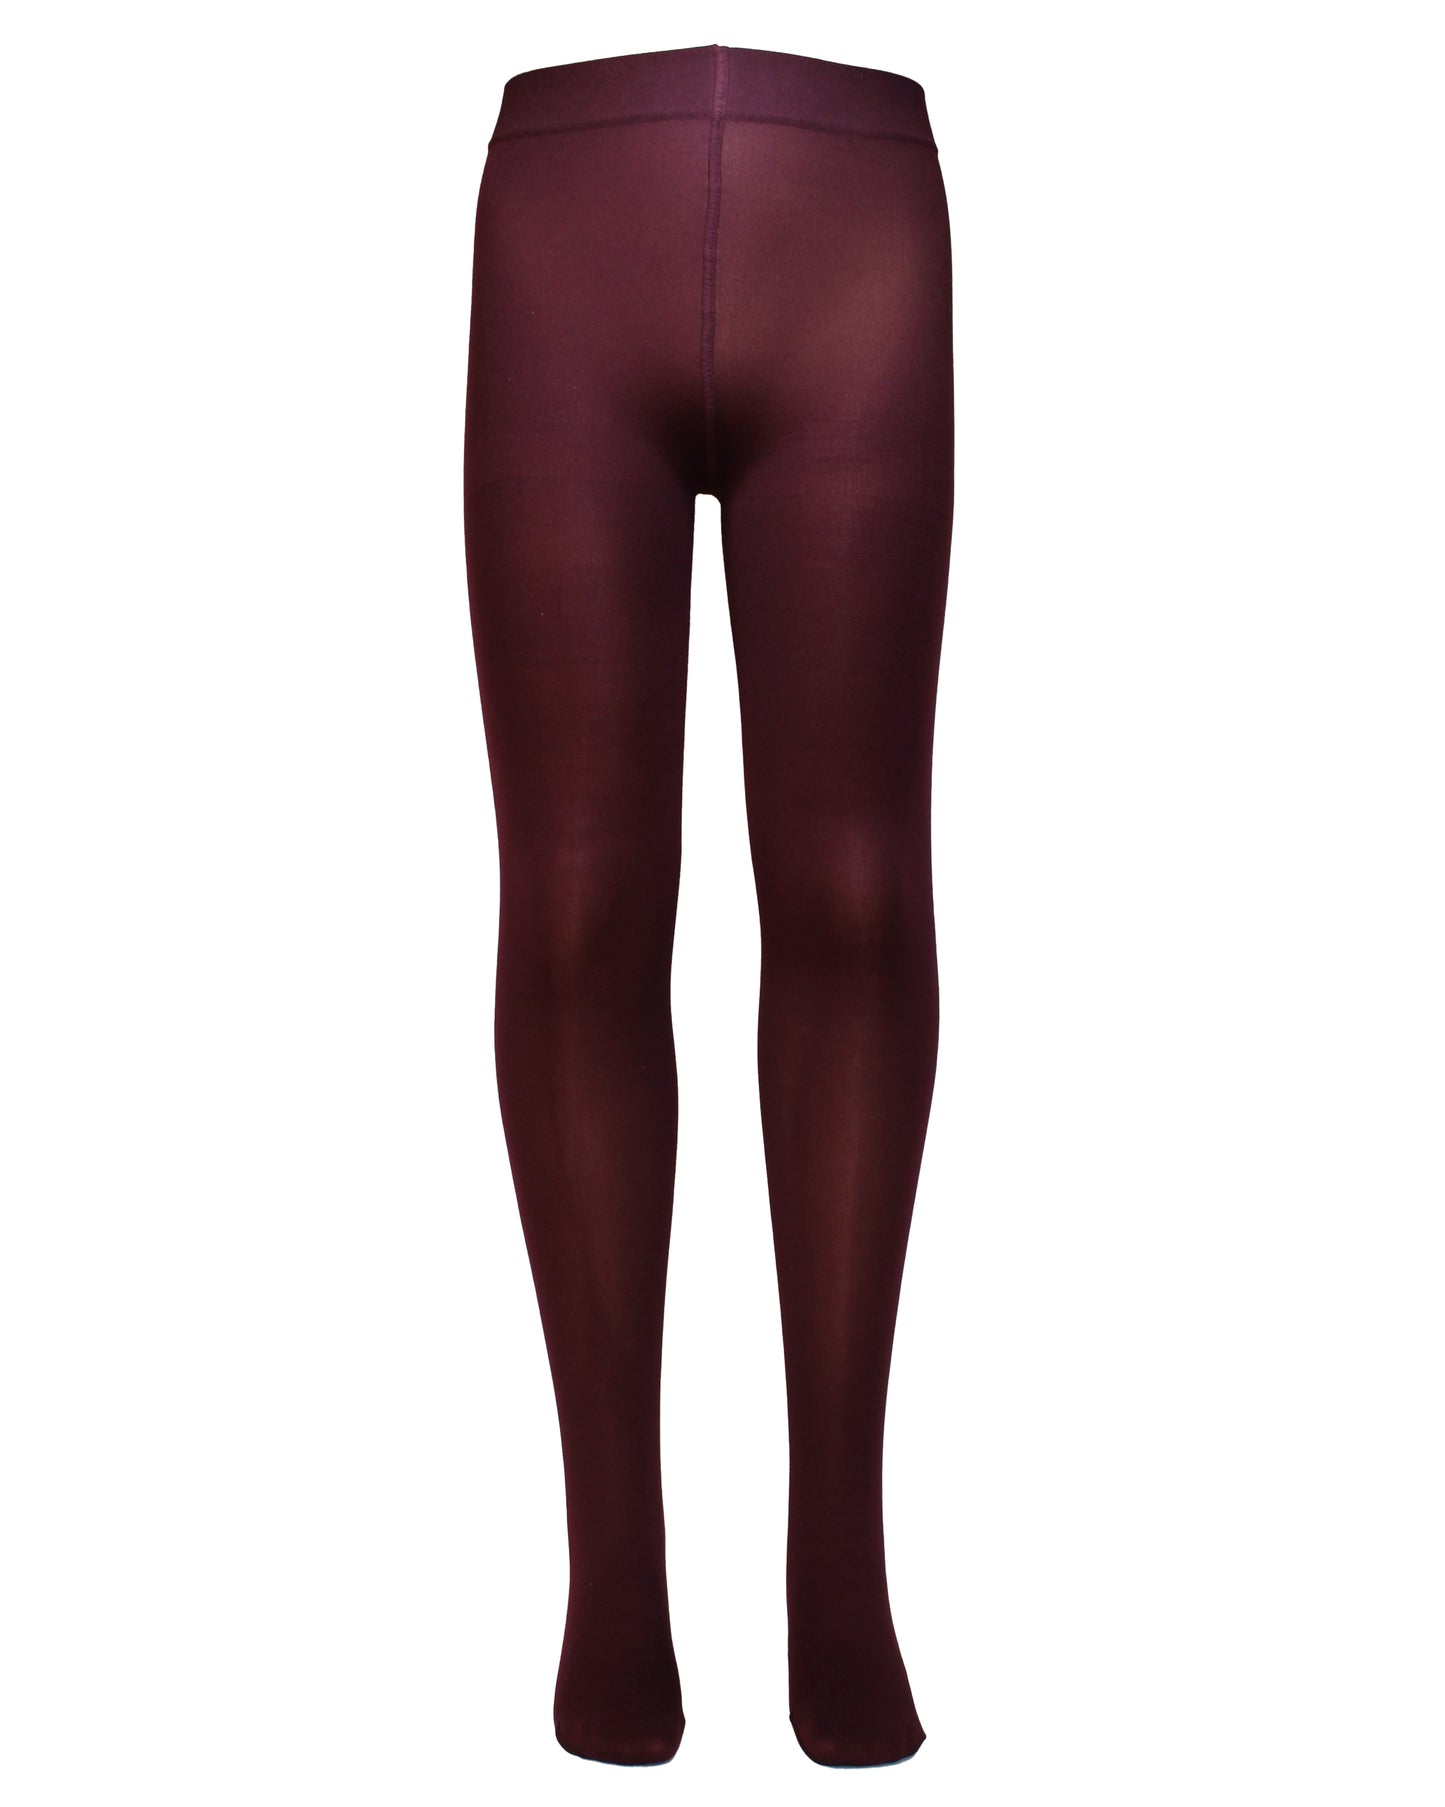 Omsa MiniVelour 40 Tights - Dark aubergine wine purple soft and matte opaque plain kid's tights with flat seams, deep waistband and reinforced toes.